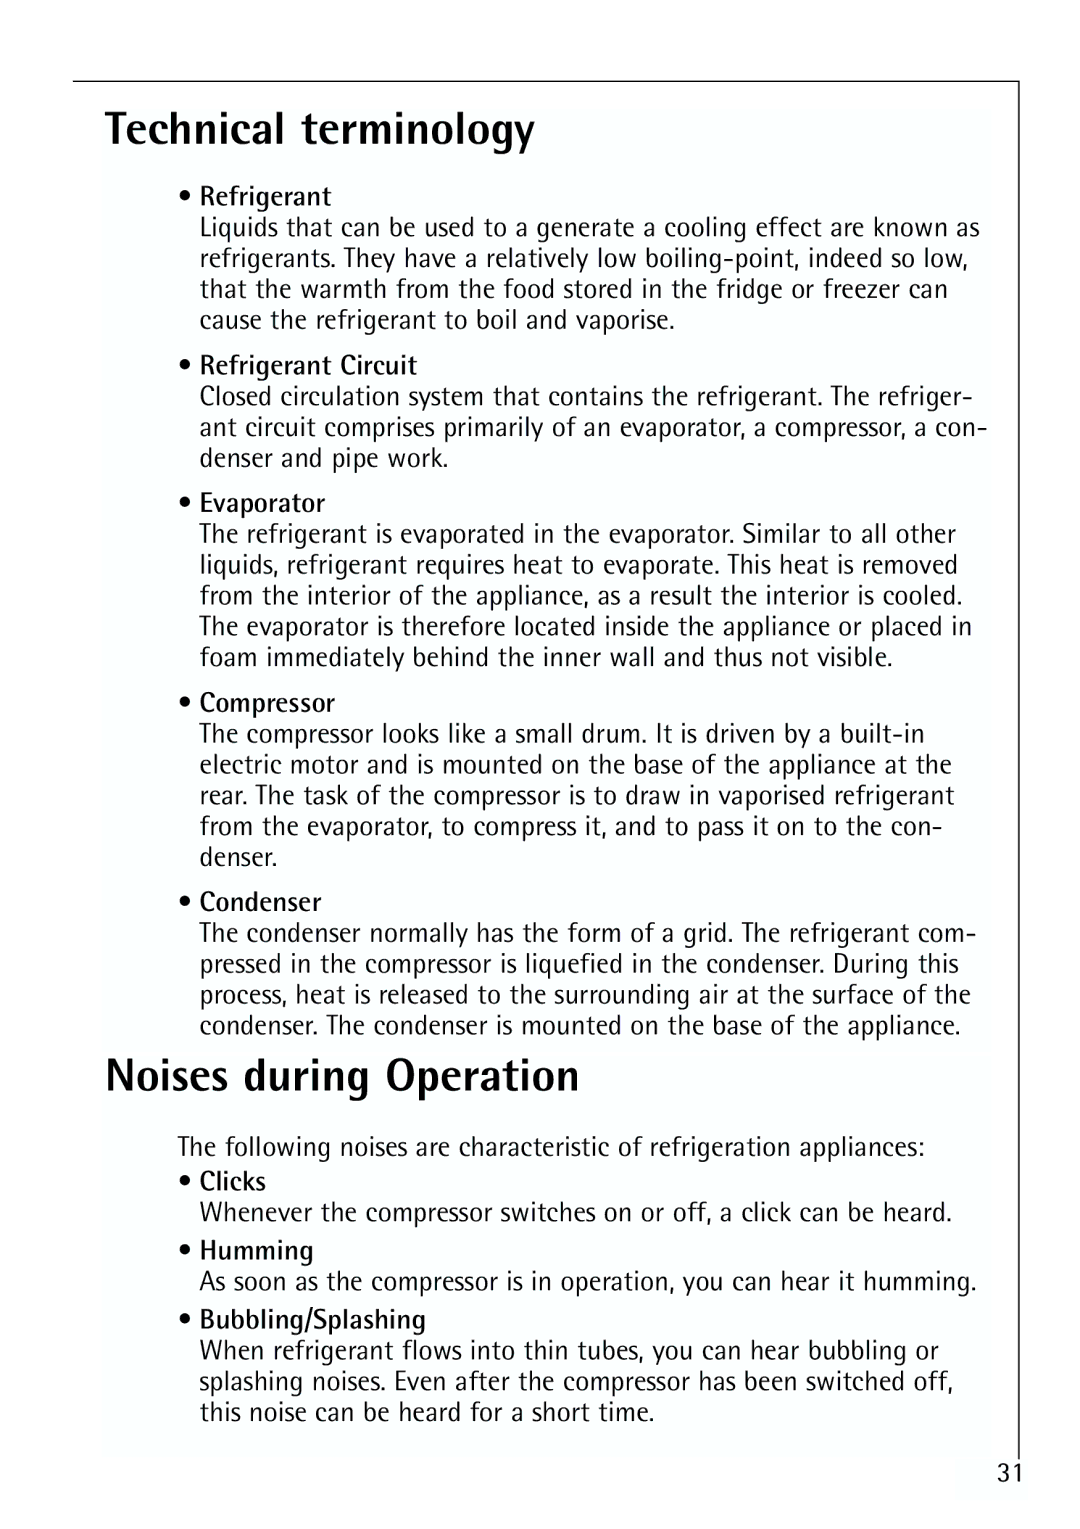 Electrolux U 96040-4 i installation instructions Technical terminology, Noises during Operation 